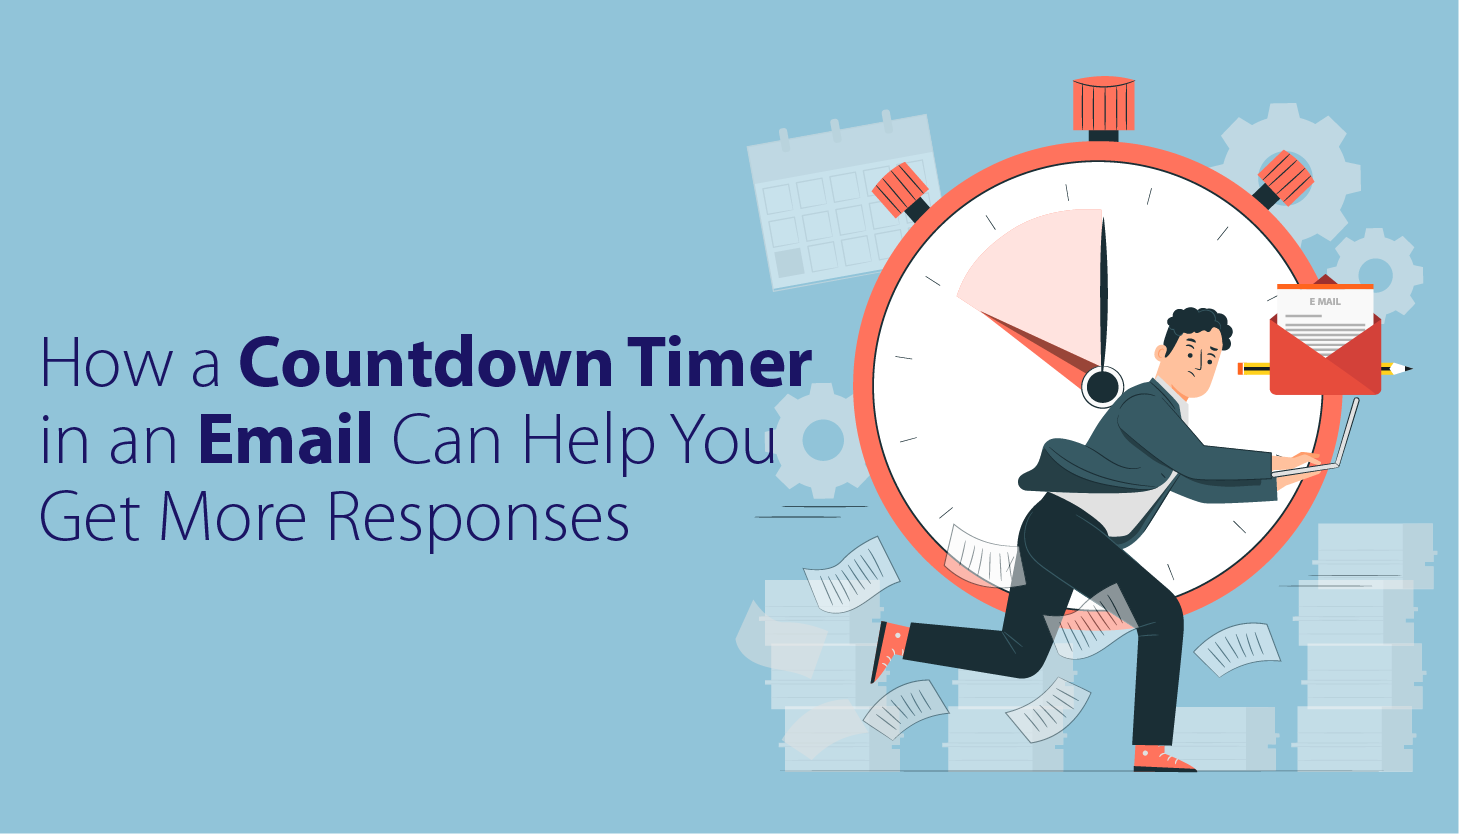  How a Countdown Timer in an Email Can Help You Get More Responses